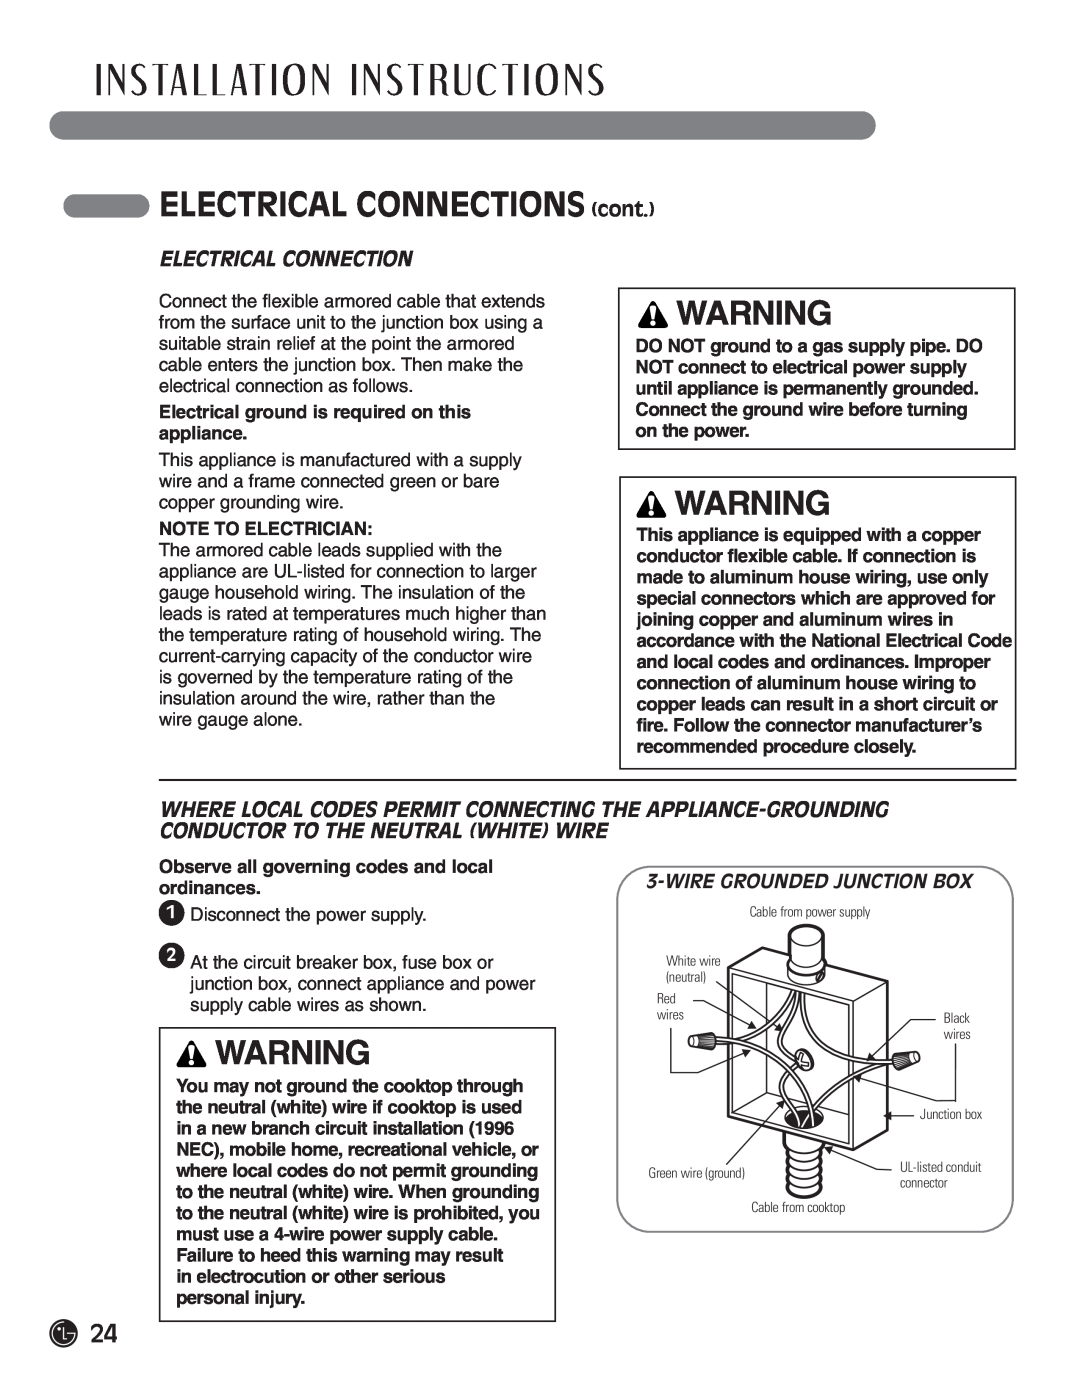 LG Electronics LCE30845, HN7413AG ELECTRICAL CONNECTIONS cont, Electrical Connection, Wire Grounded Junction Box 